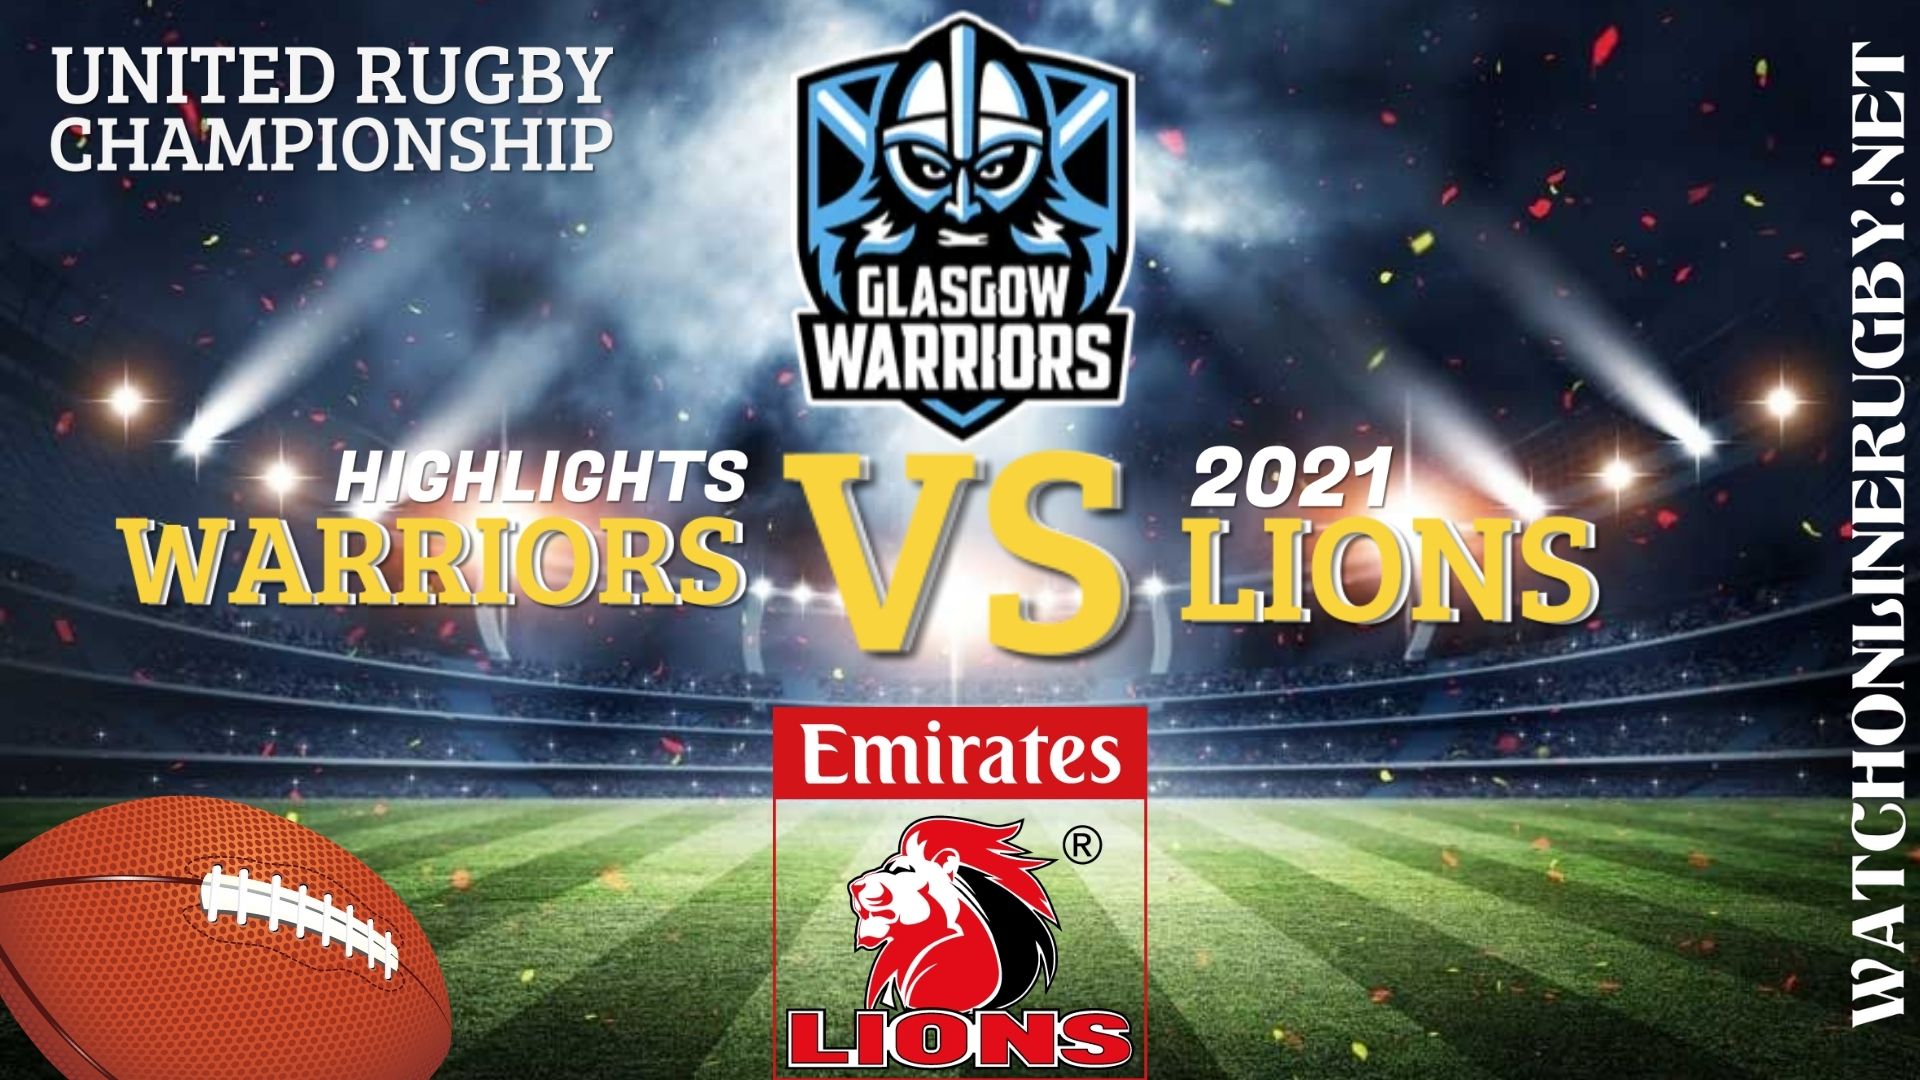 Glasgow Warriors Vs Lions United Rugby Championship 2021 RD 3